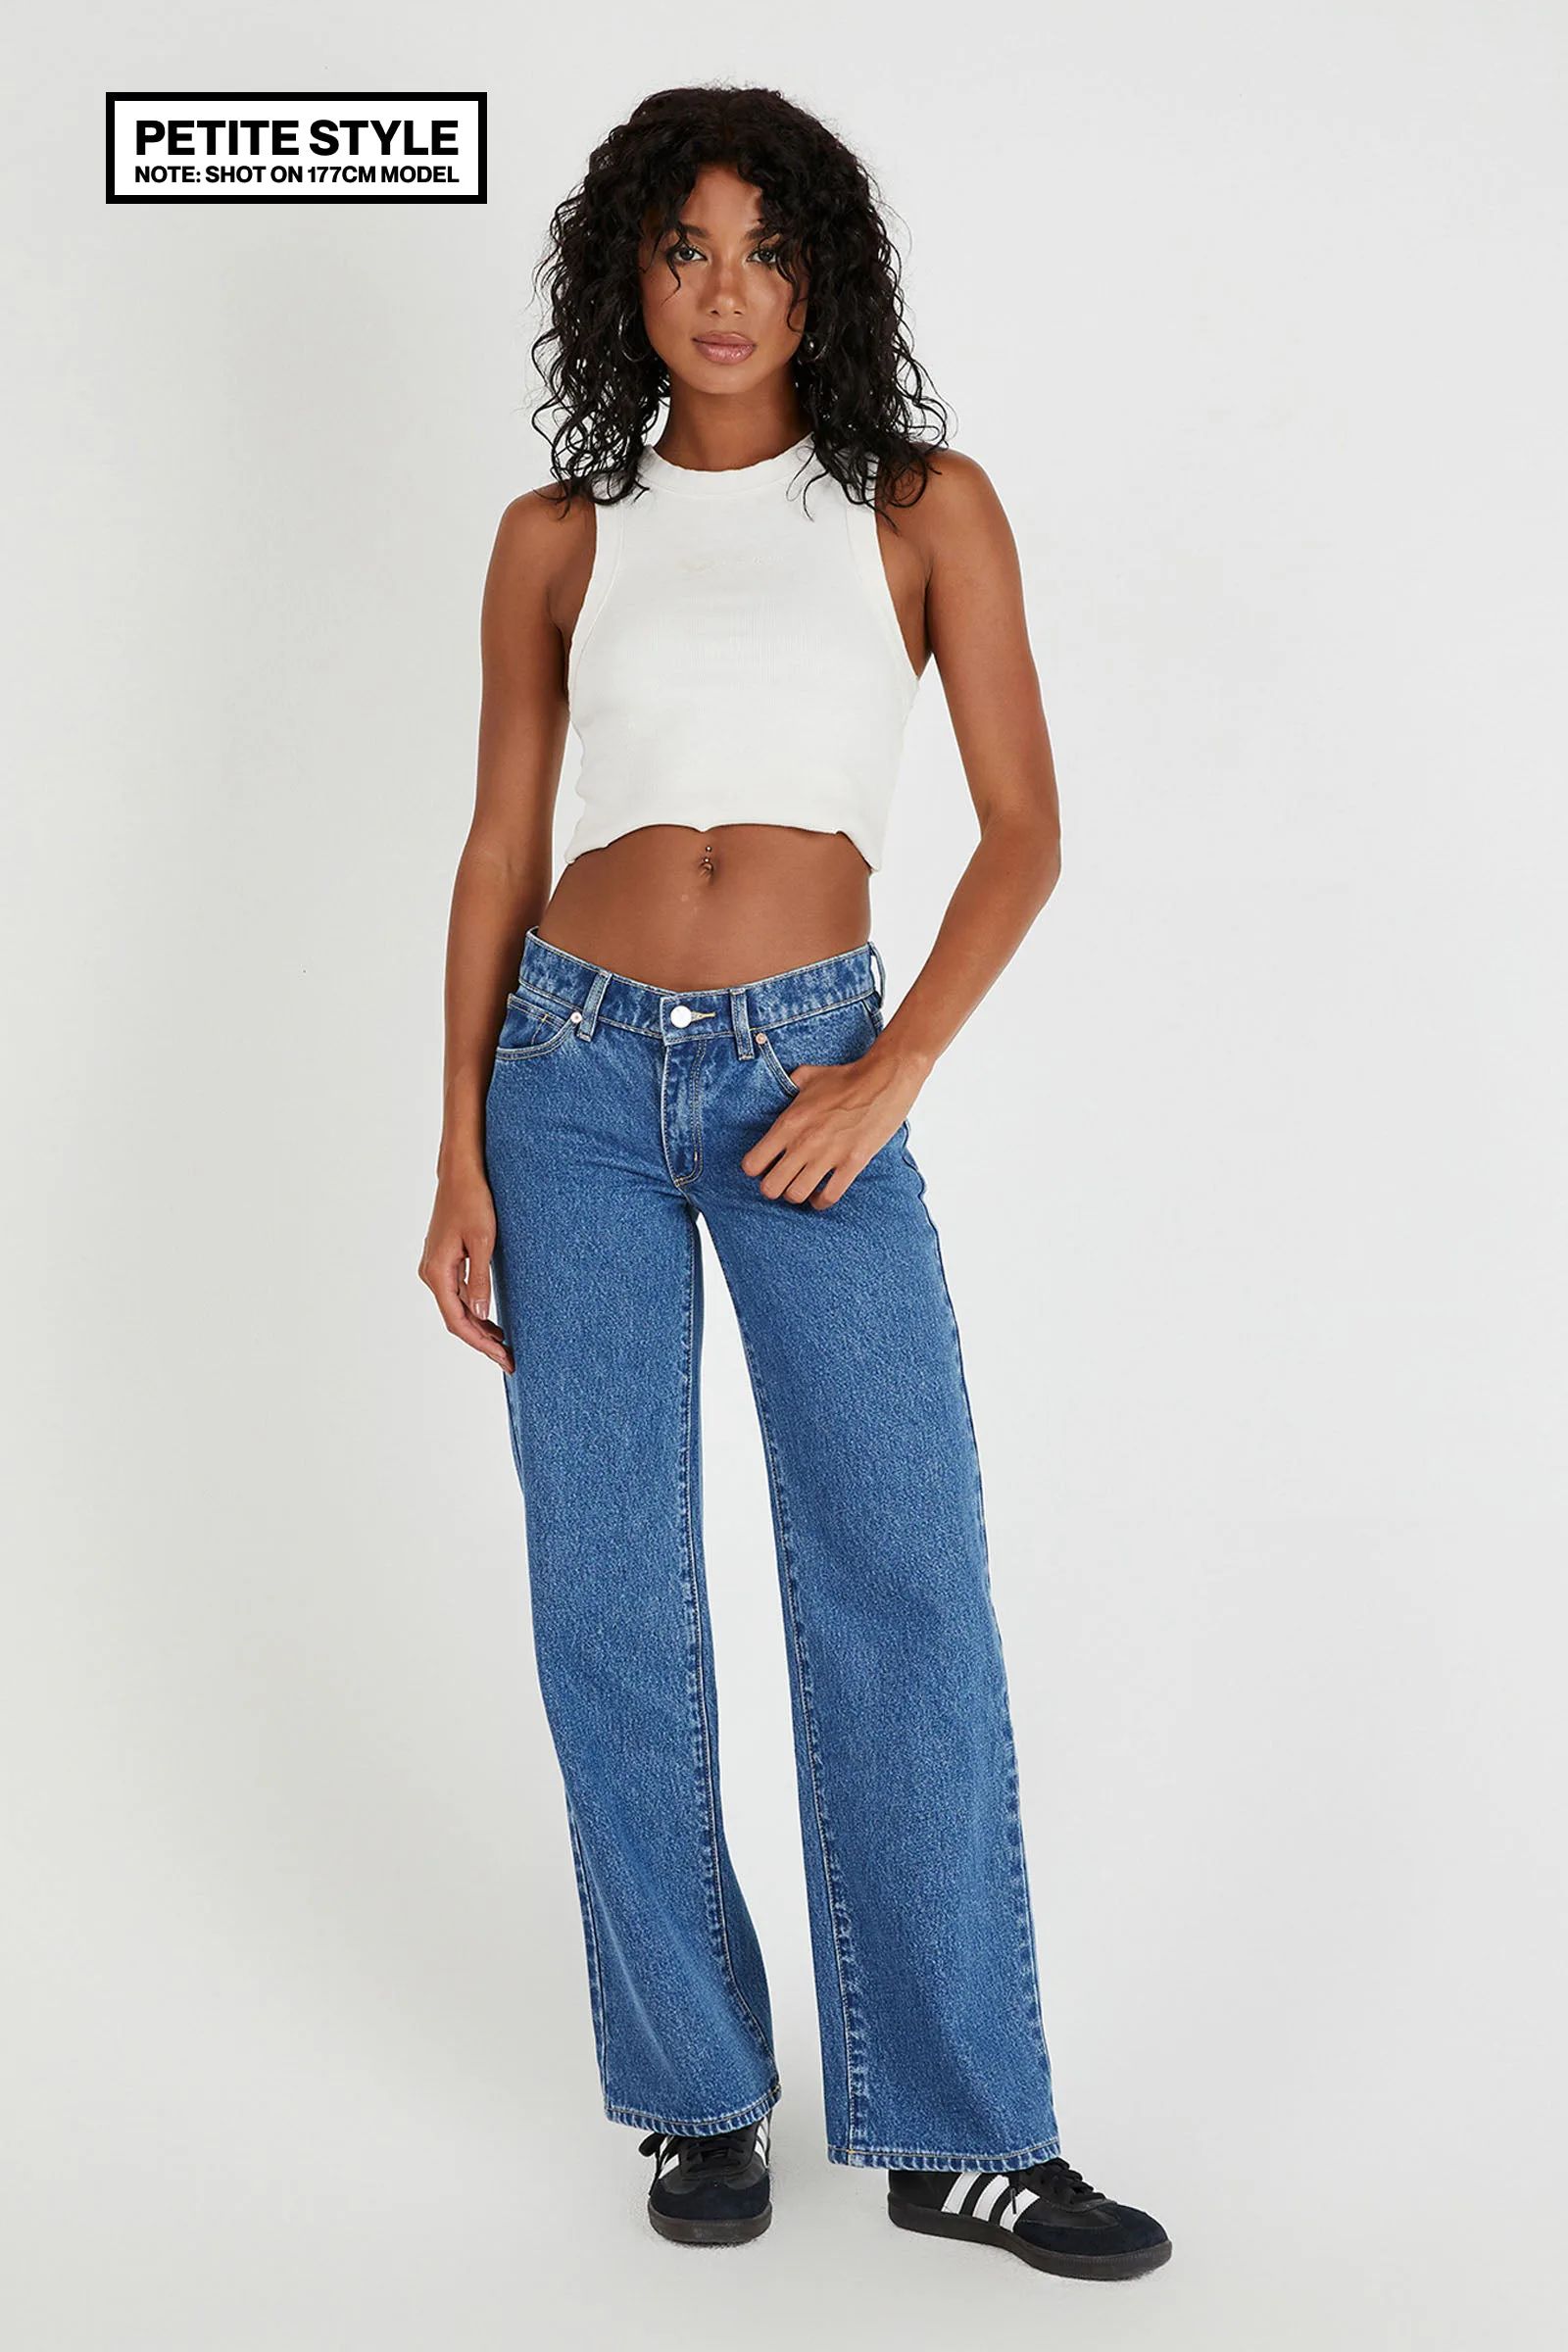 99 Low & Wide Petite Chantell Organic | Abrand Jeans US